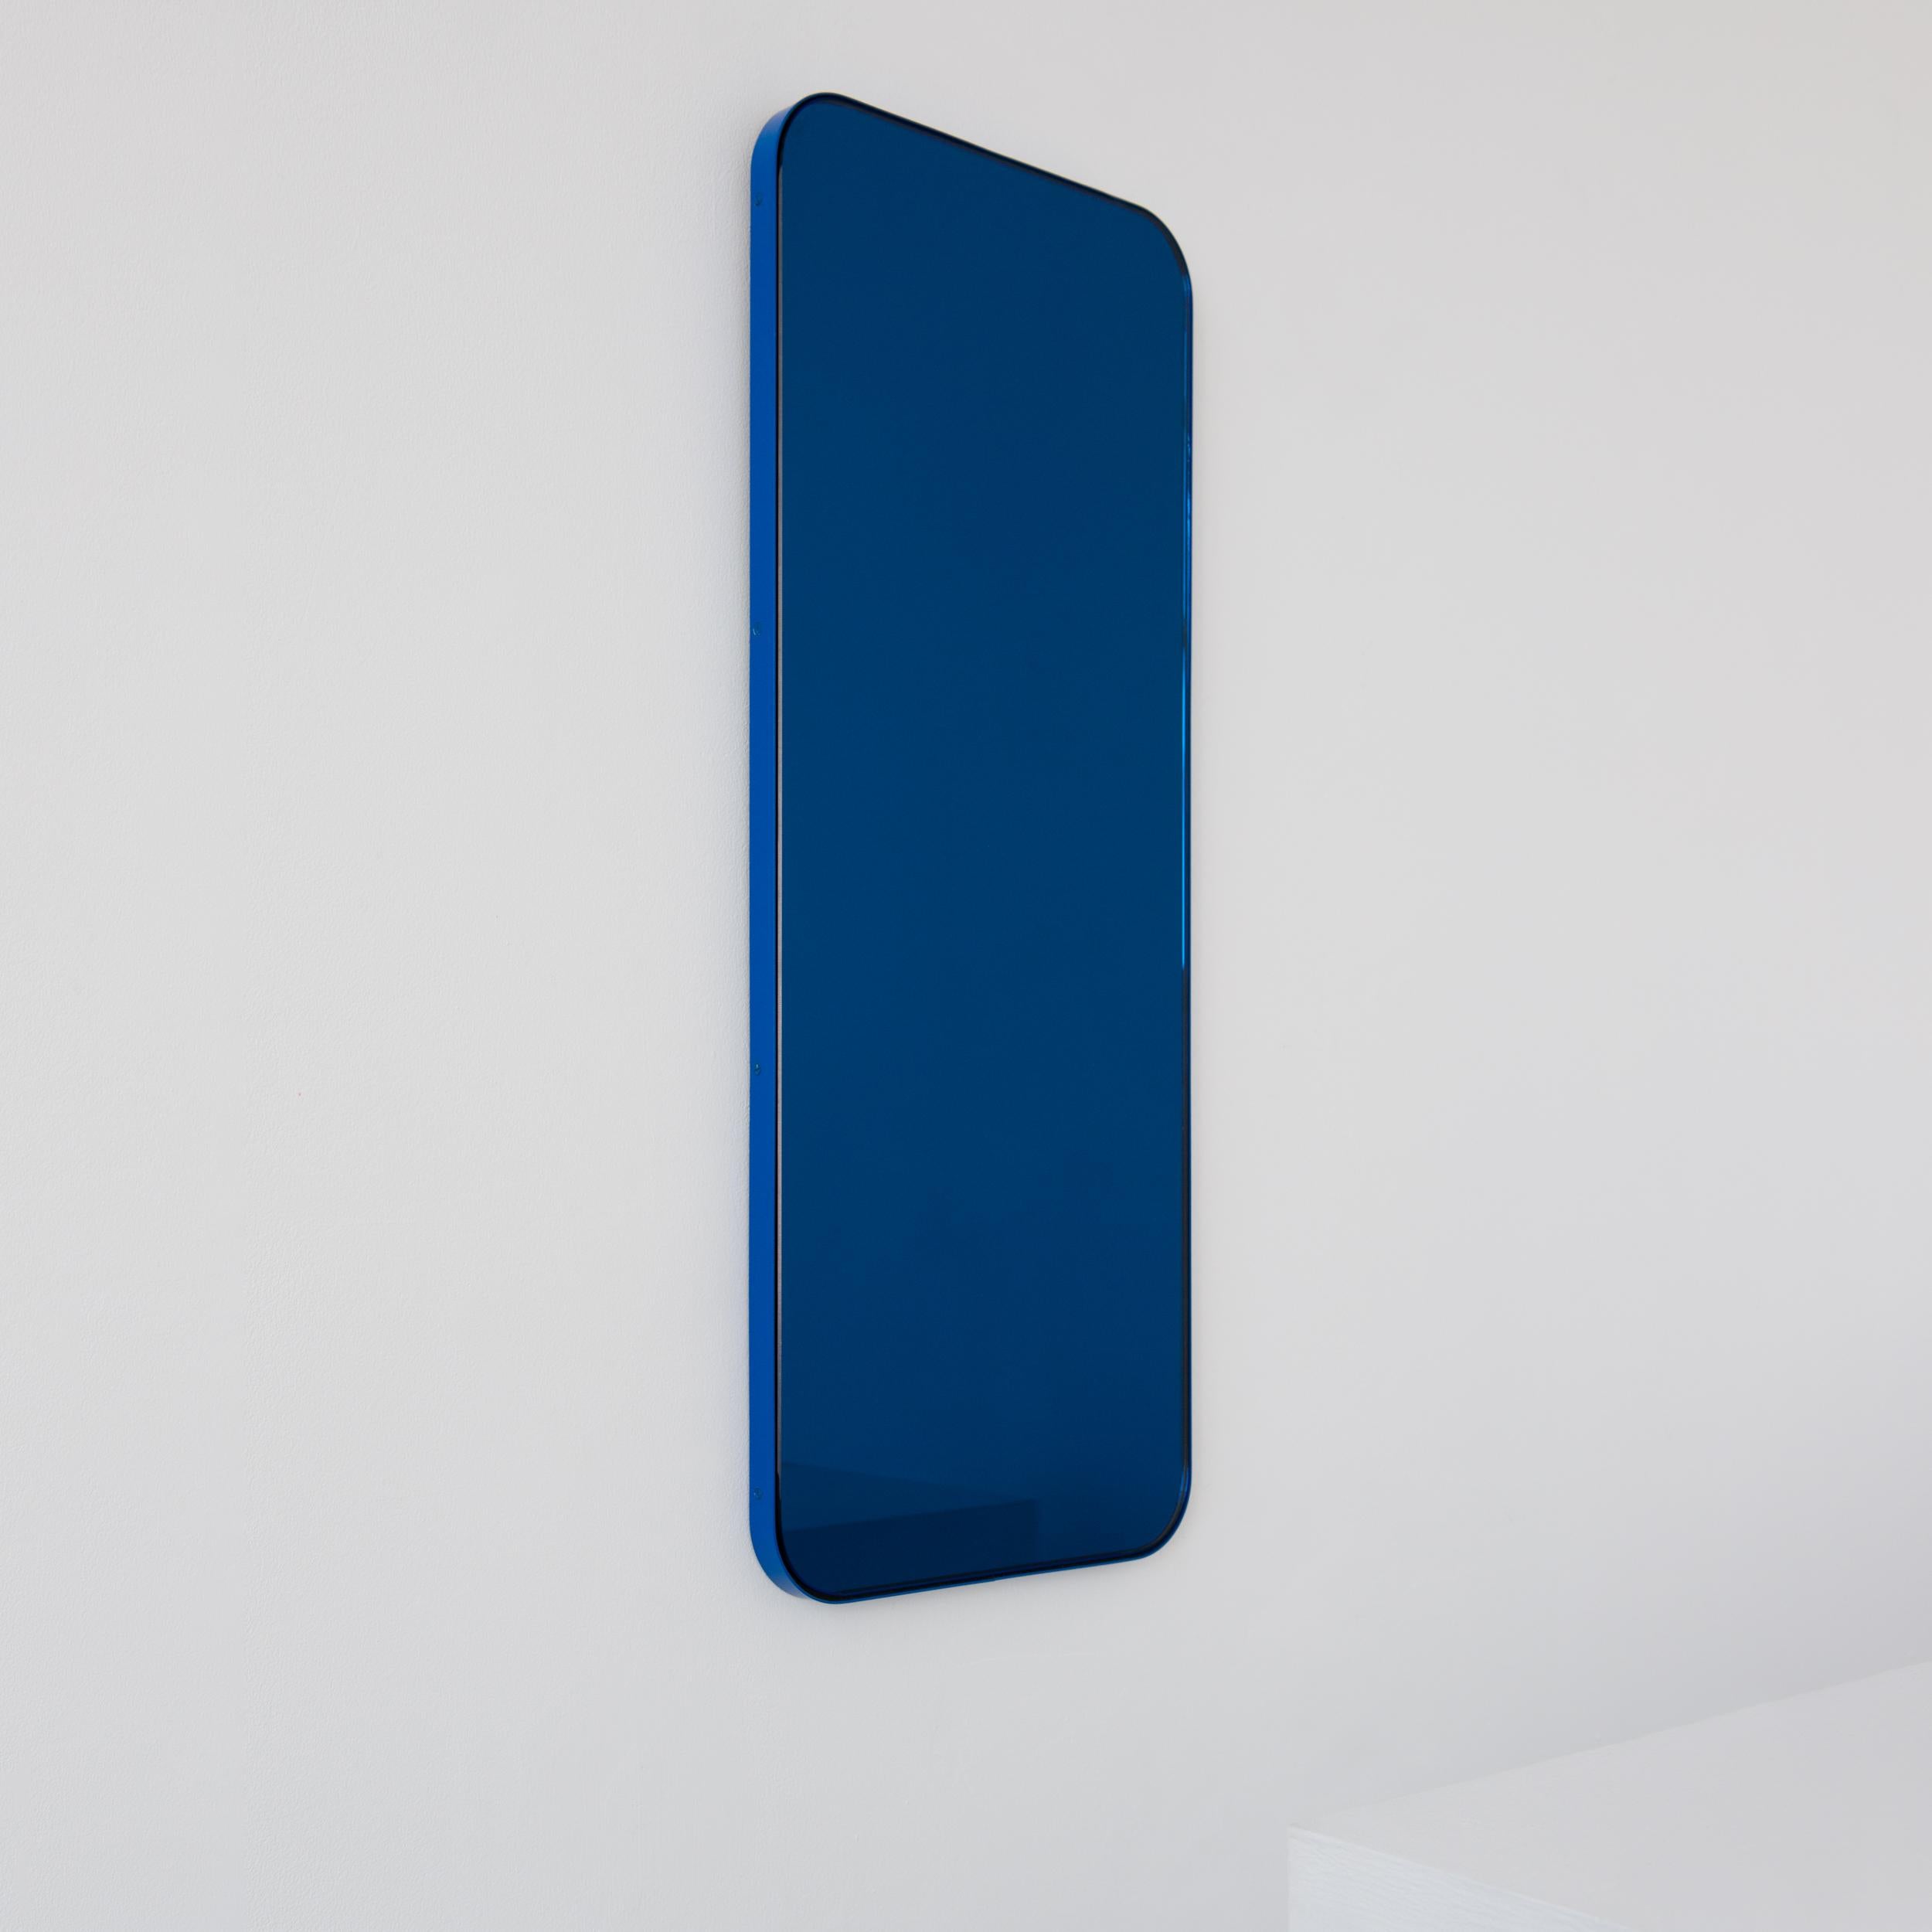 Quadris Rectangular Contemporary Blue Tinted Mirror with a Blue Frame, Small In New Condition For Sale In London, GB